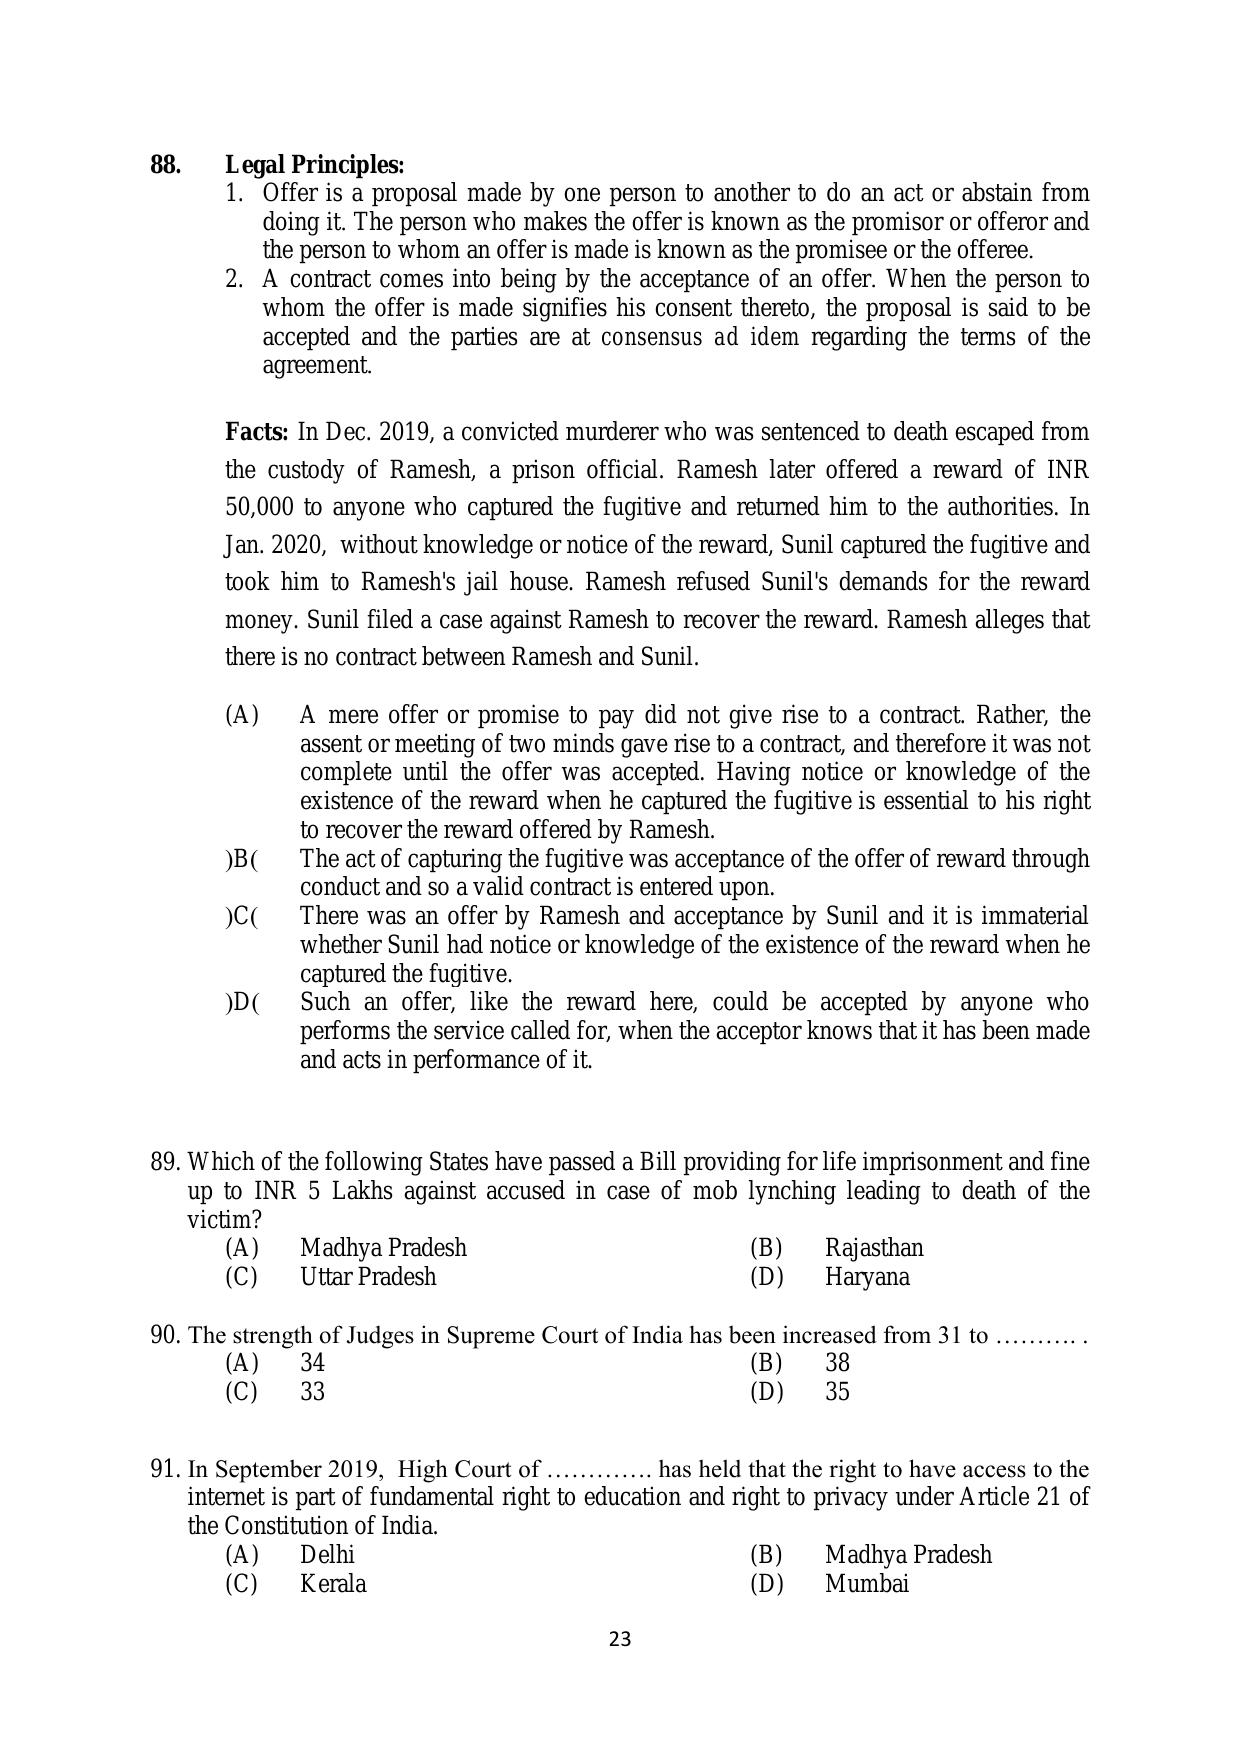 AILET 2020 Question Paper for BA LLB - Page 23